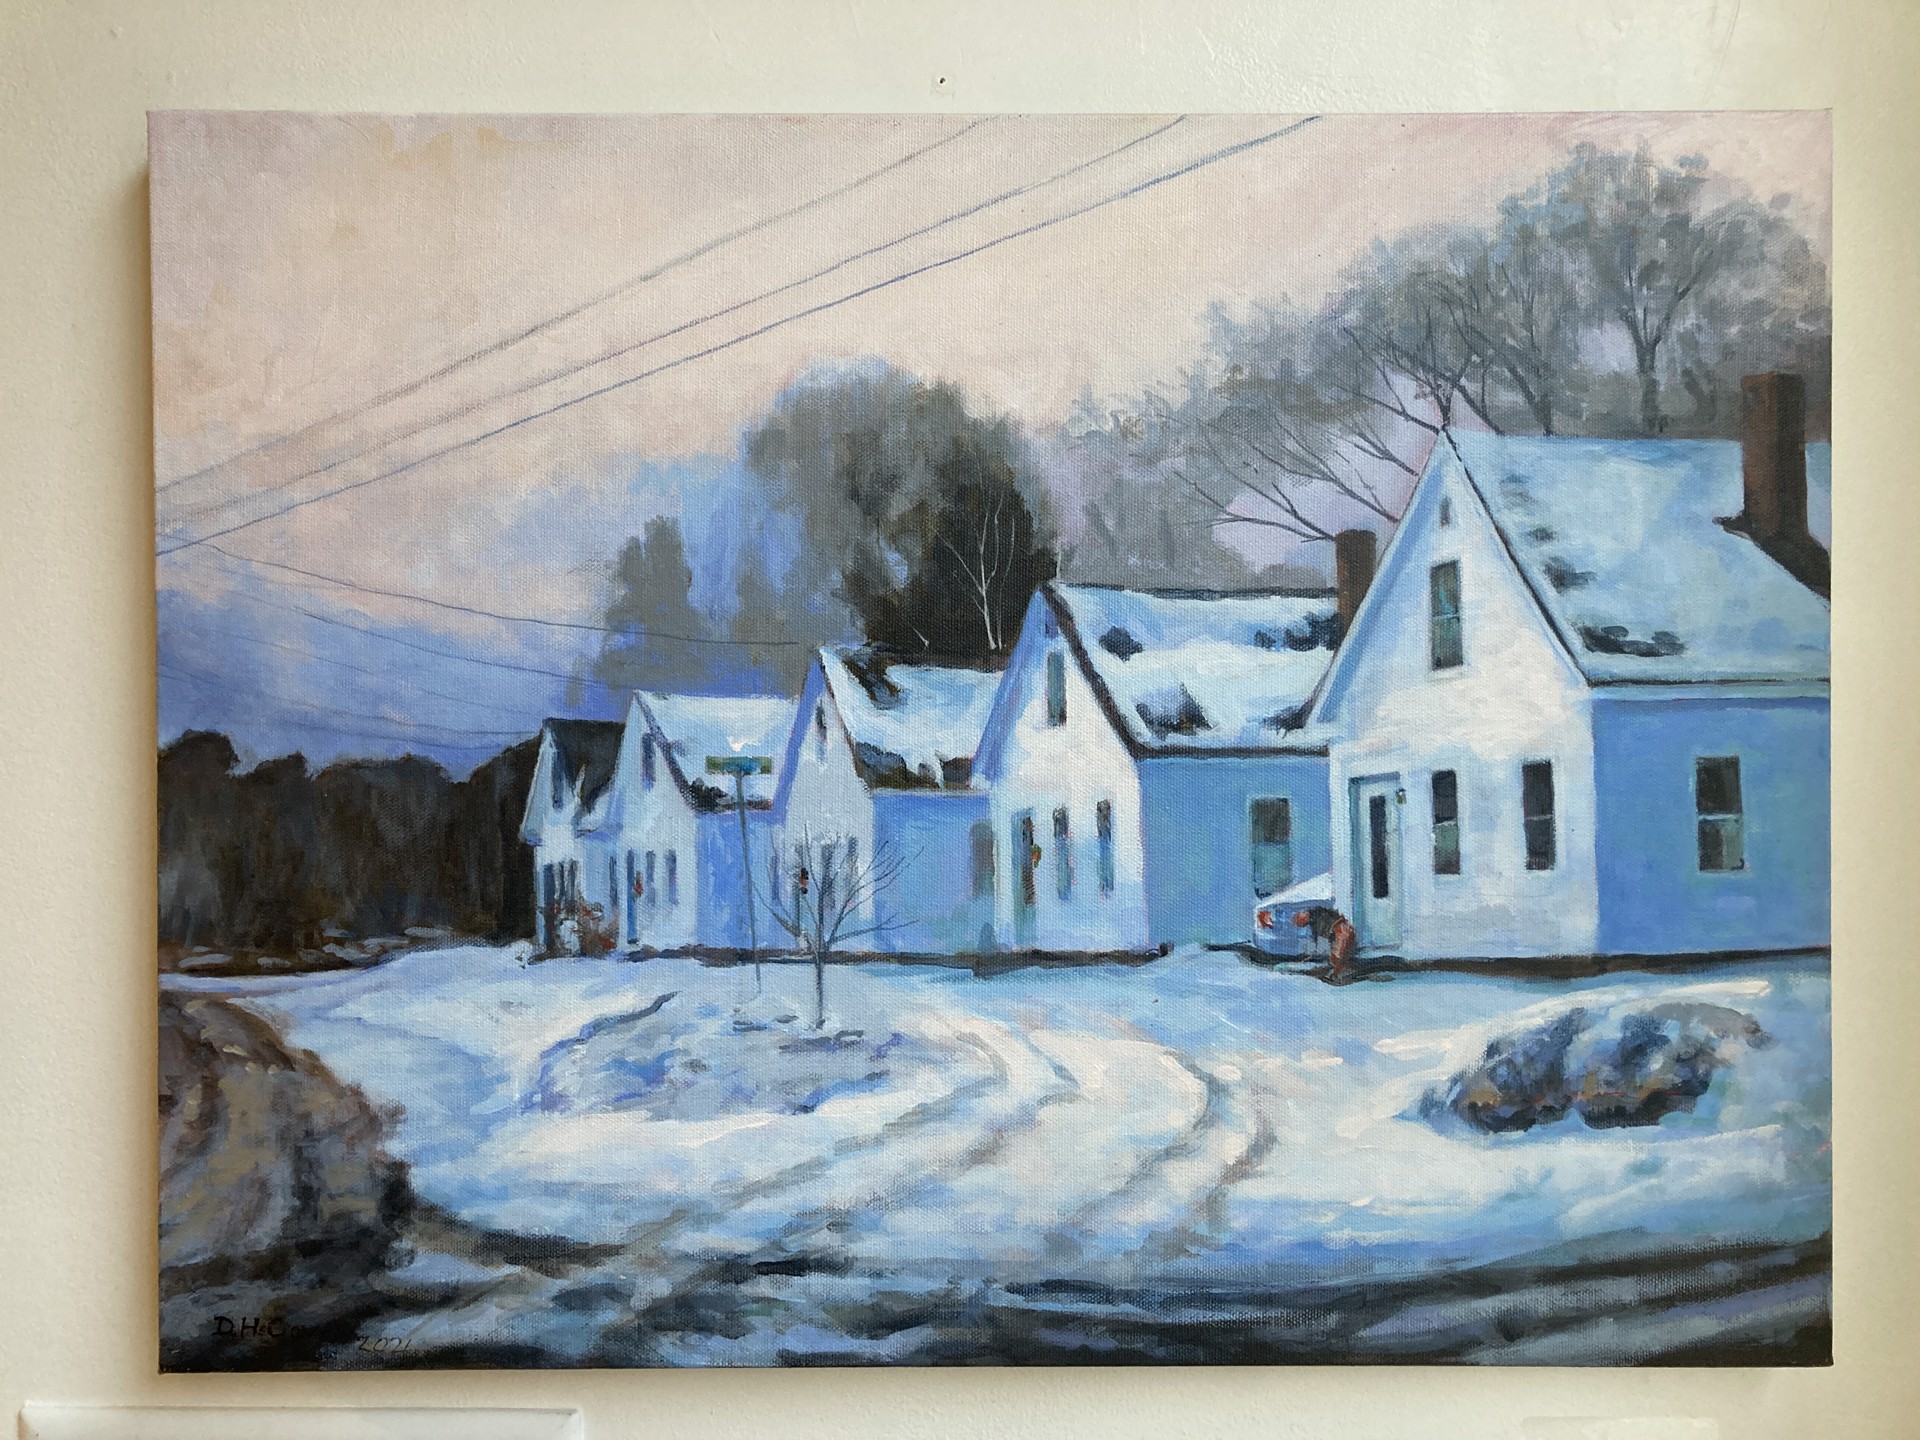 Winter Afternoon in Harrisville by Douglas H. Caves Sr.